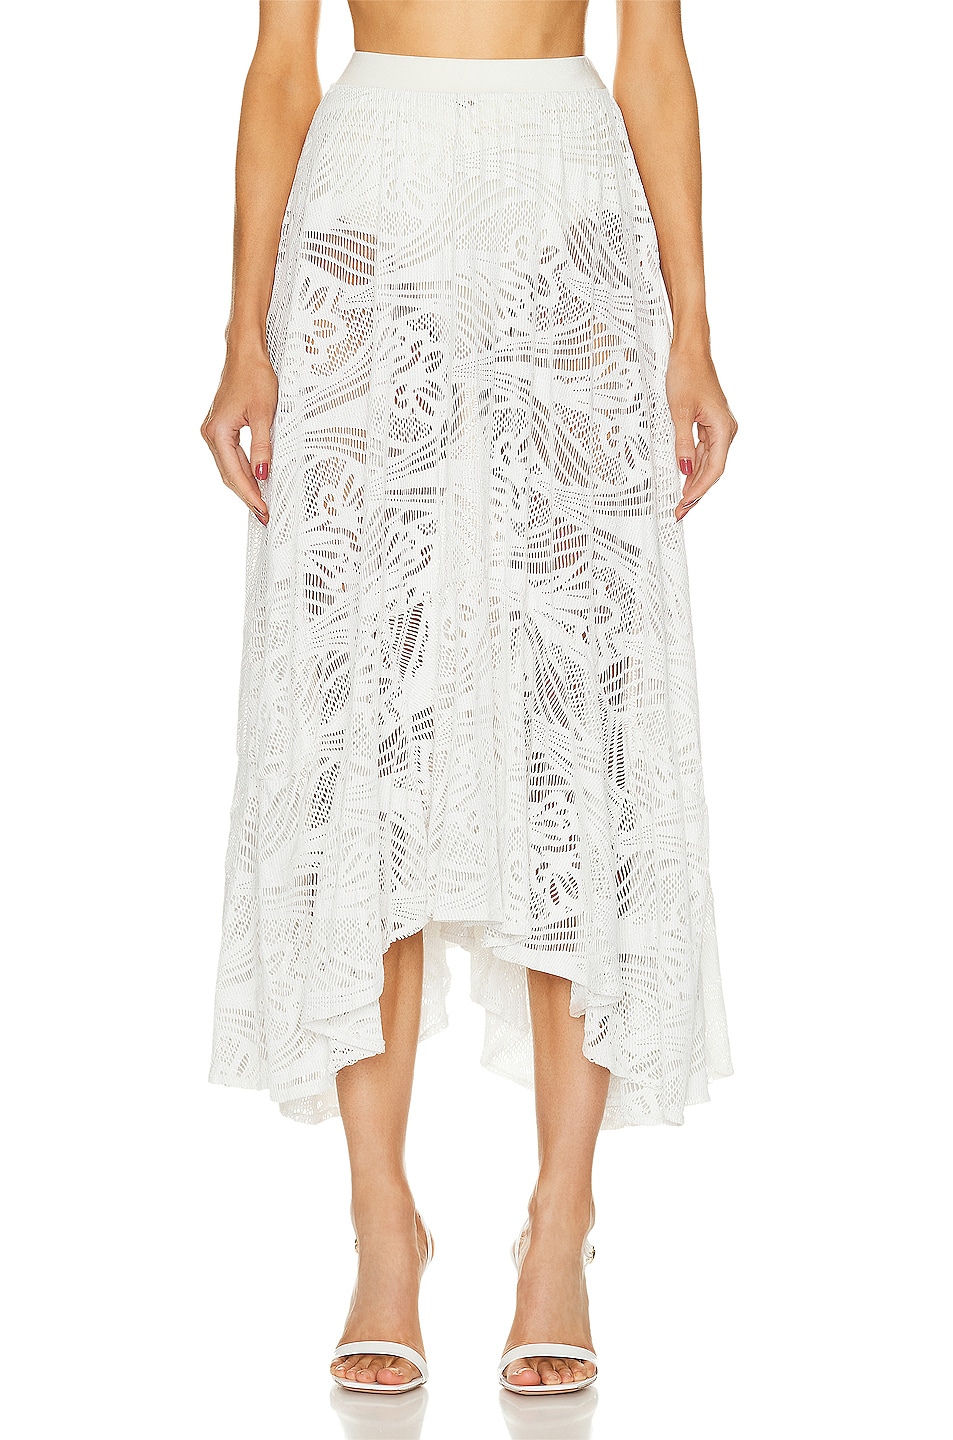 Image 1 of PatBO Metallic Lace Beach Skirt in White